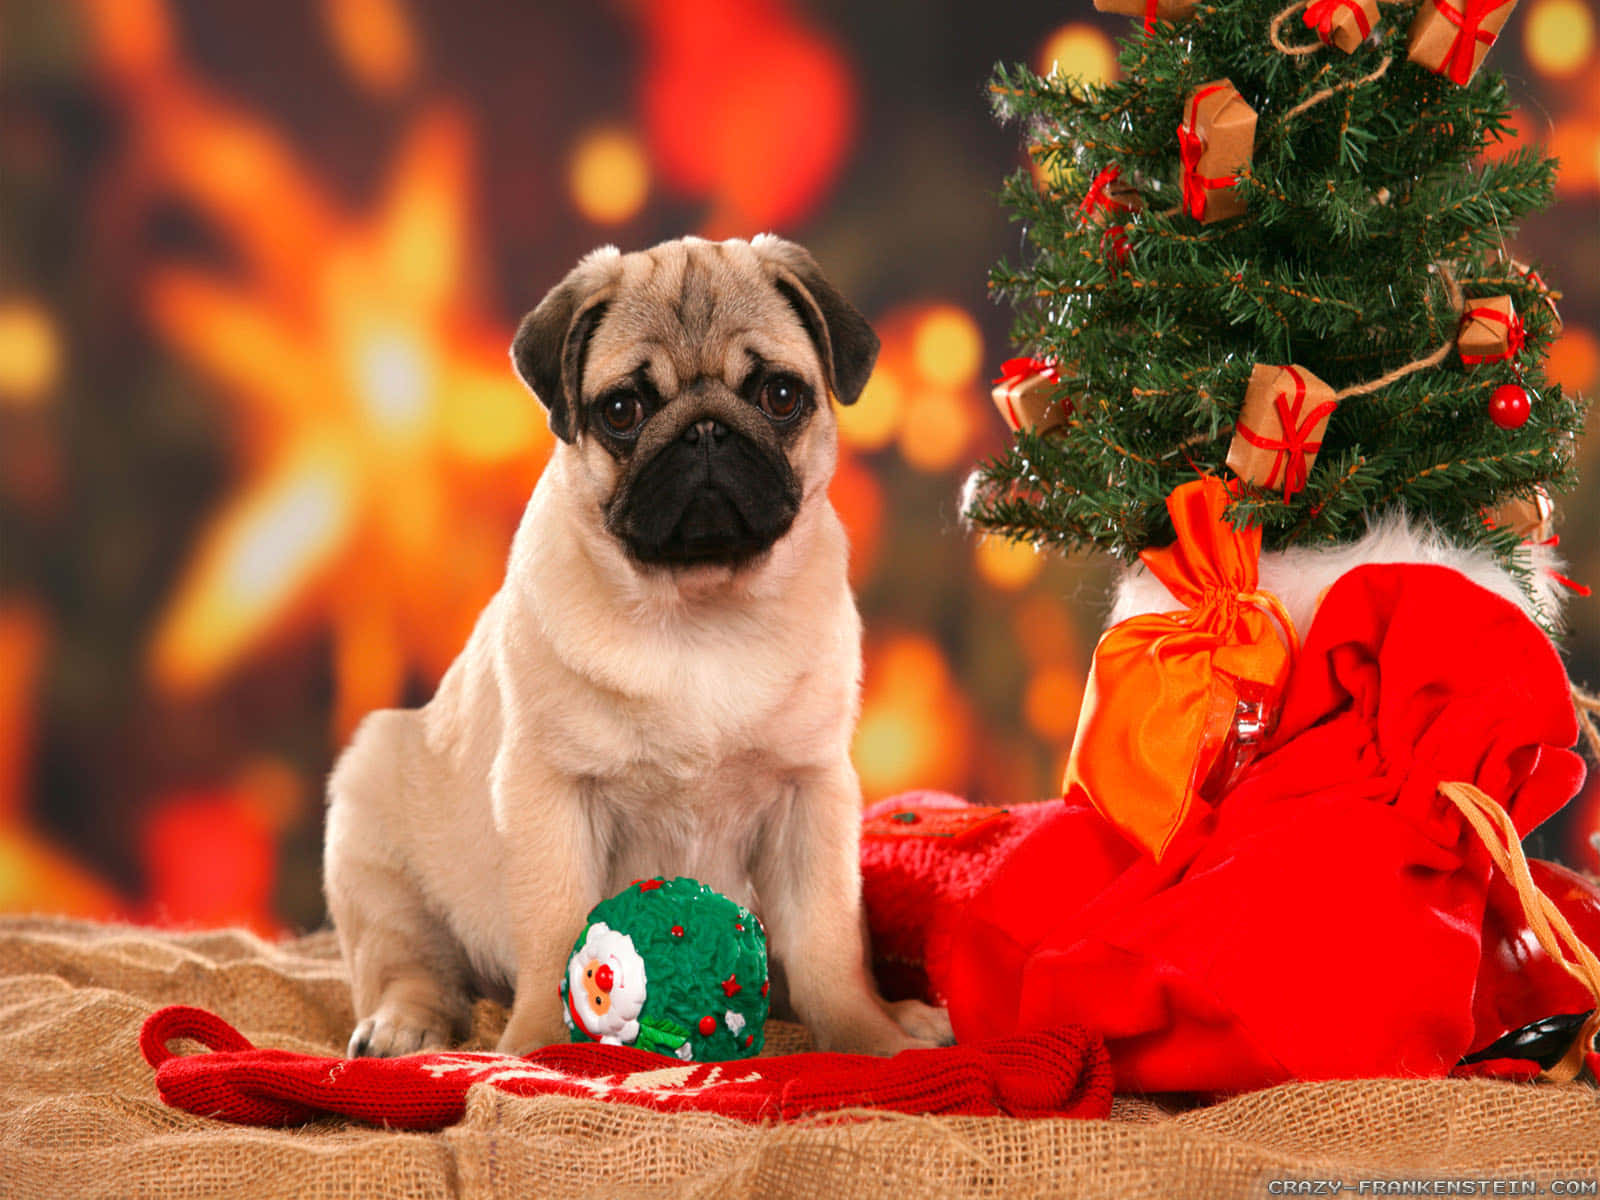 Celebrate The Holidays With Your Four-legged Best Friend